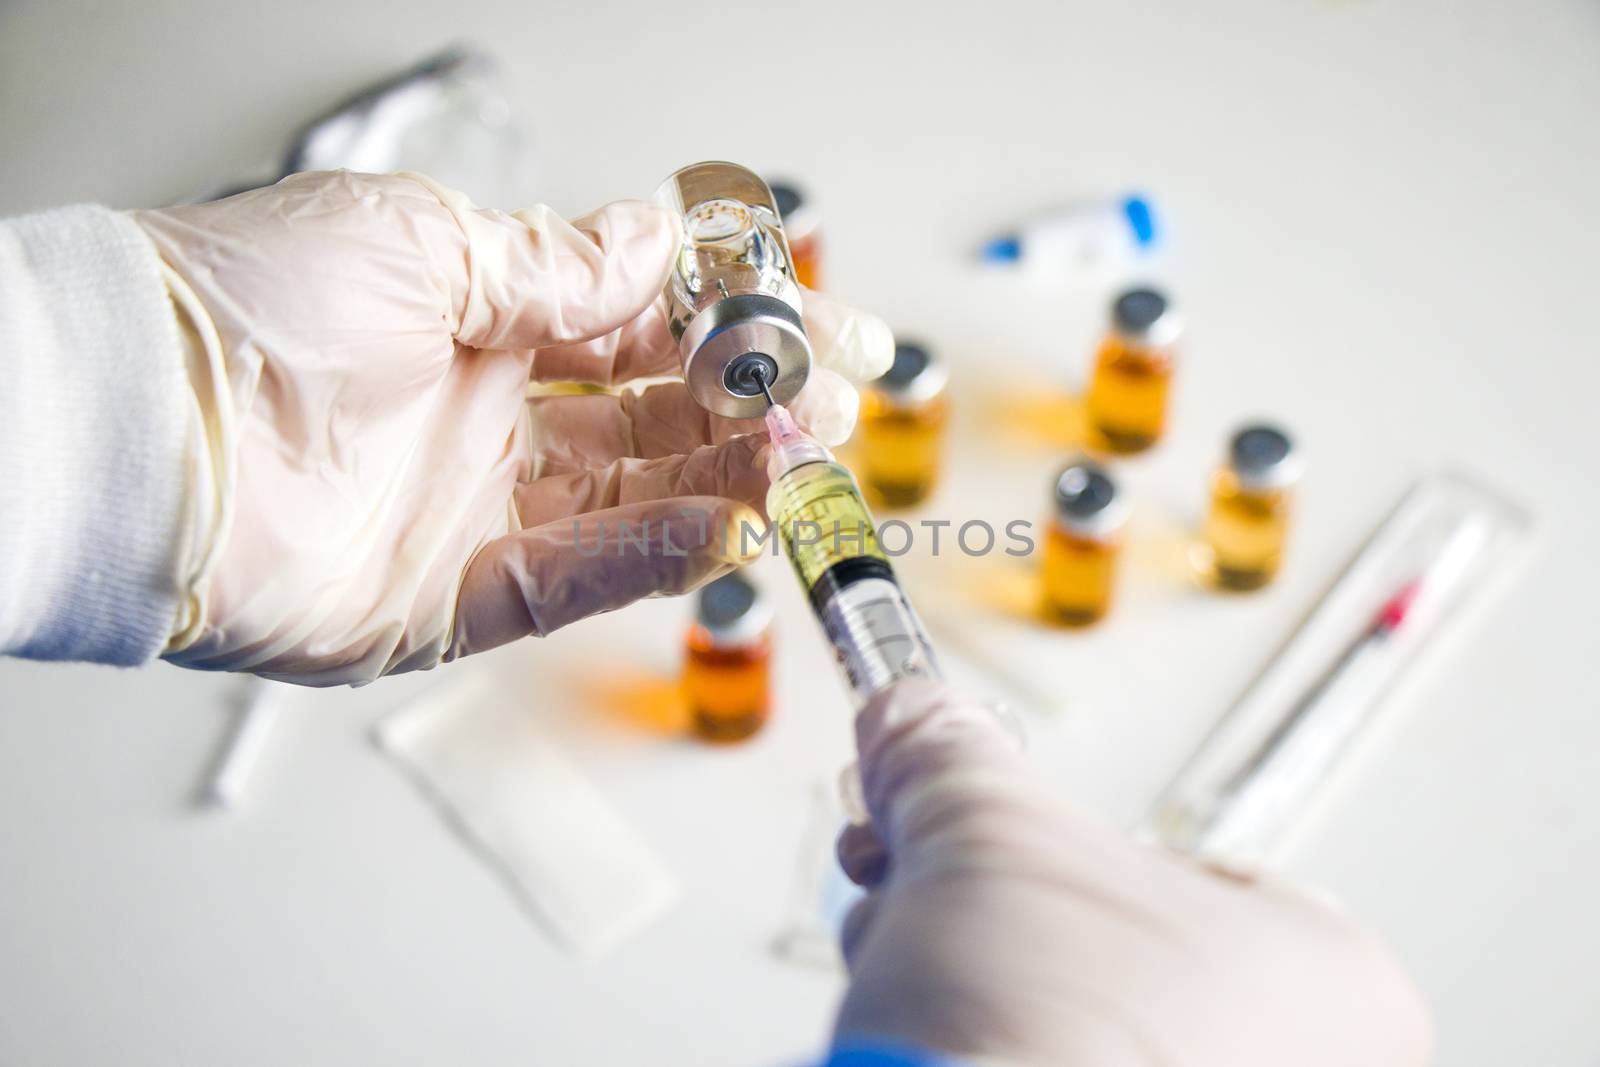 Corona virus and Covid - 19 new vaccine in ampules and bottles, needle and doctors hands with glove.